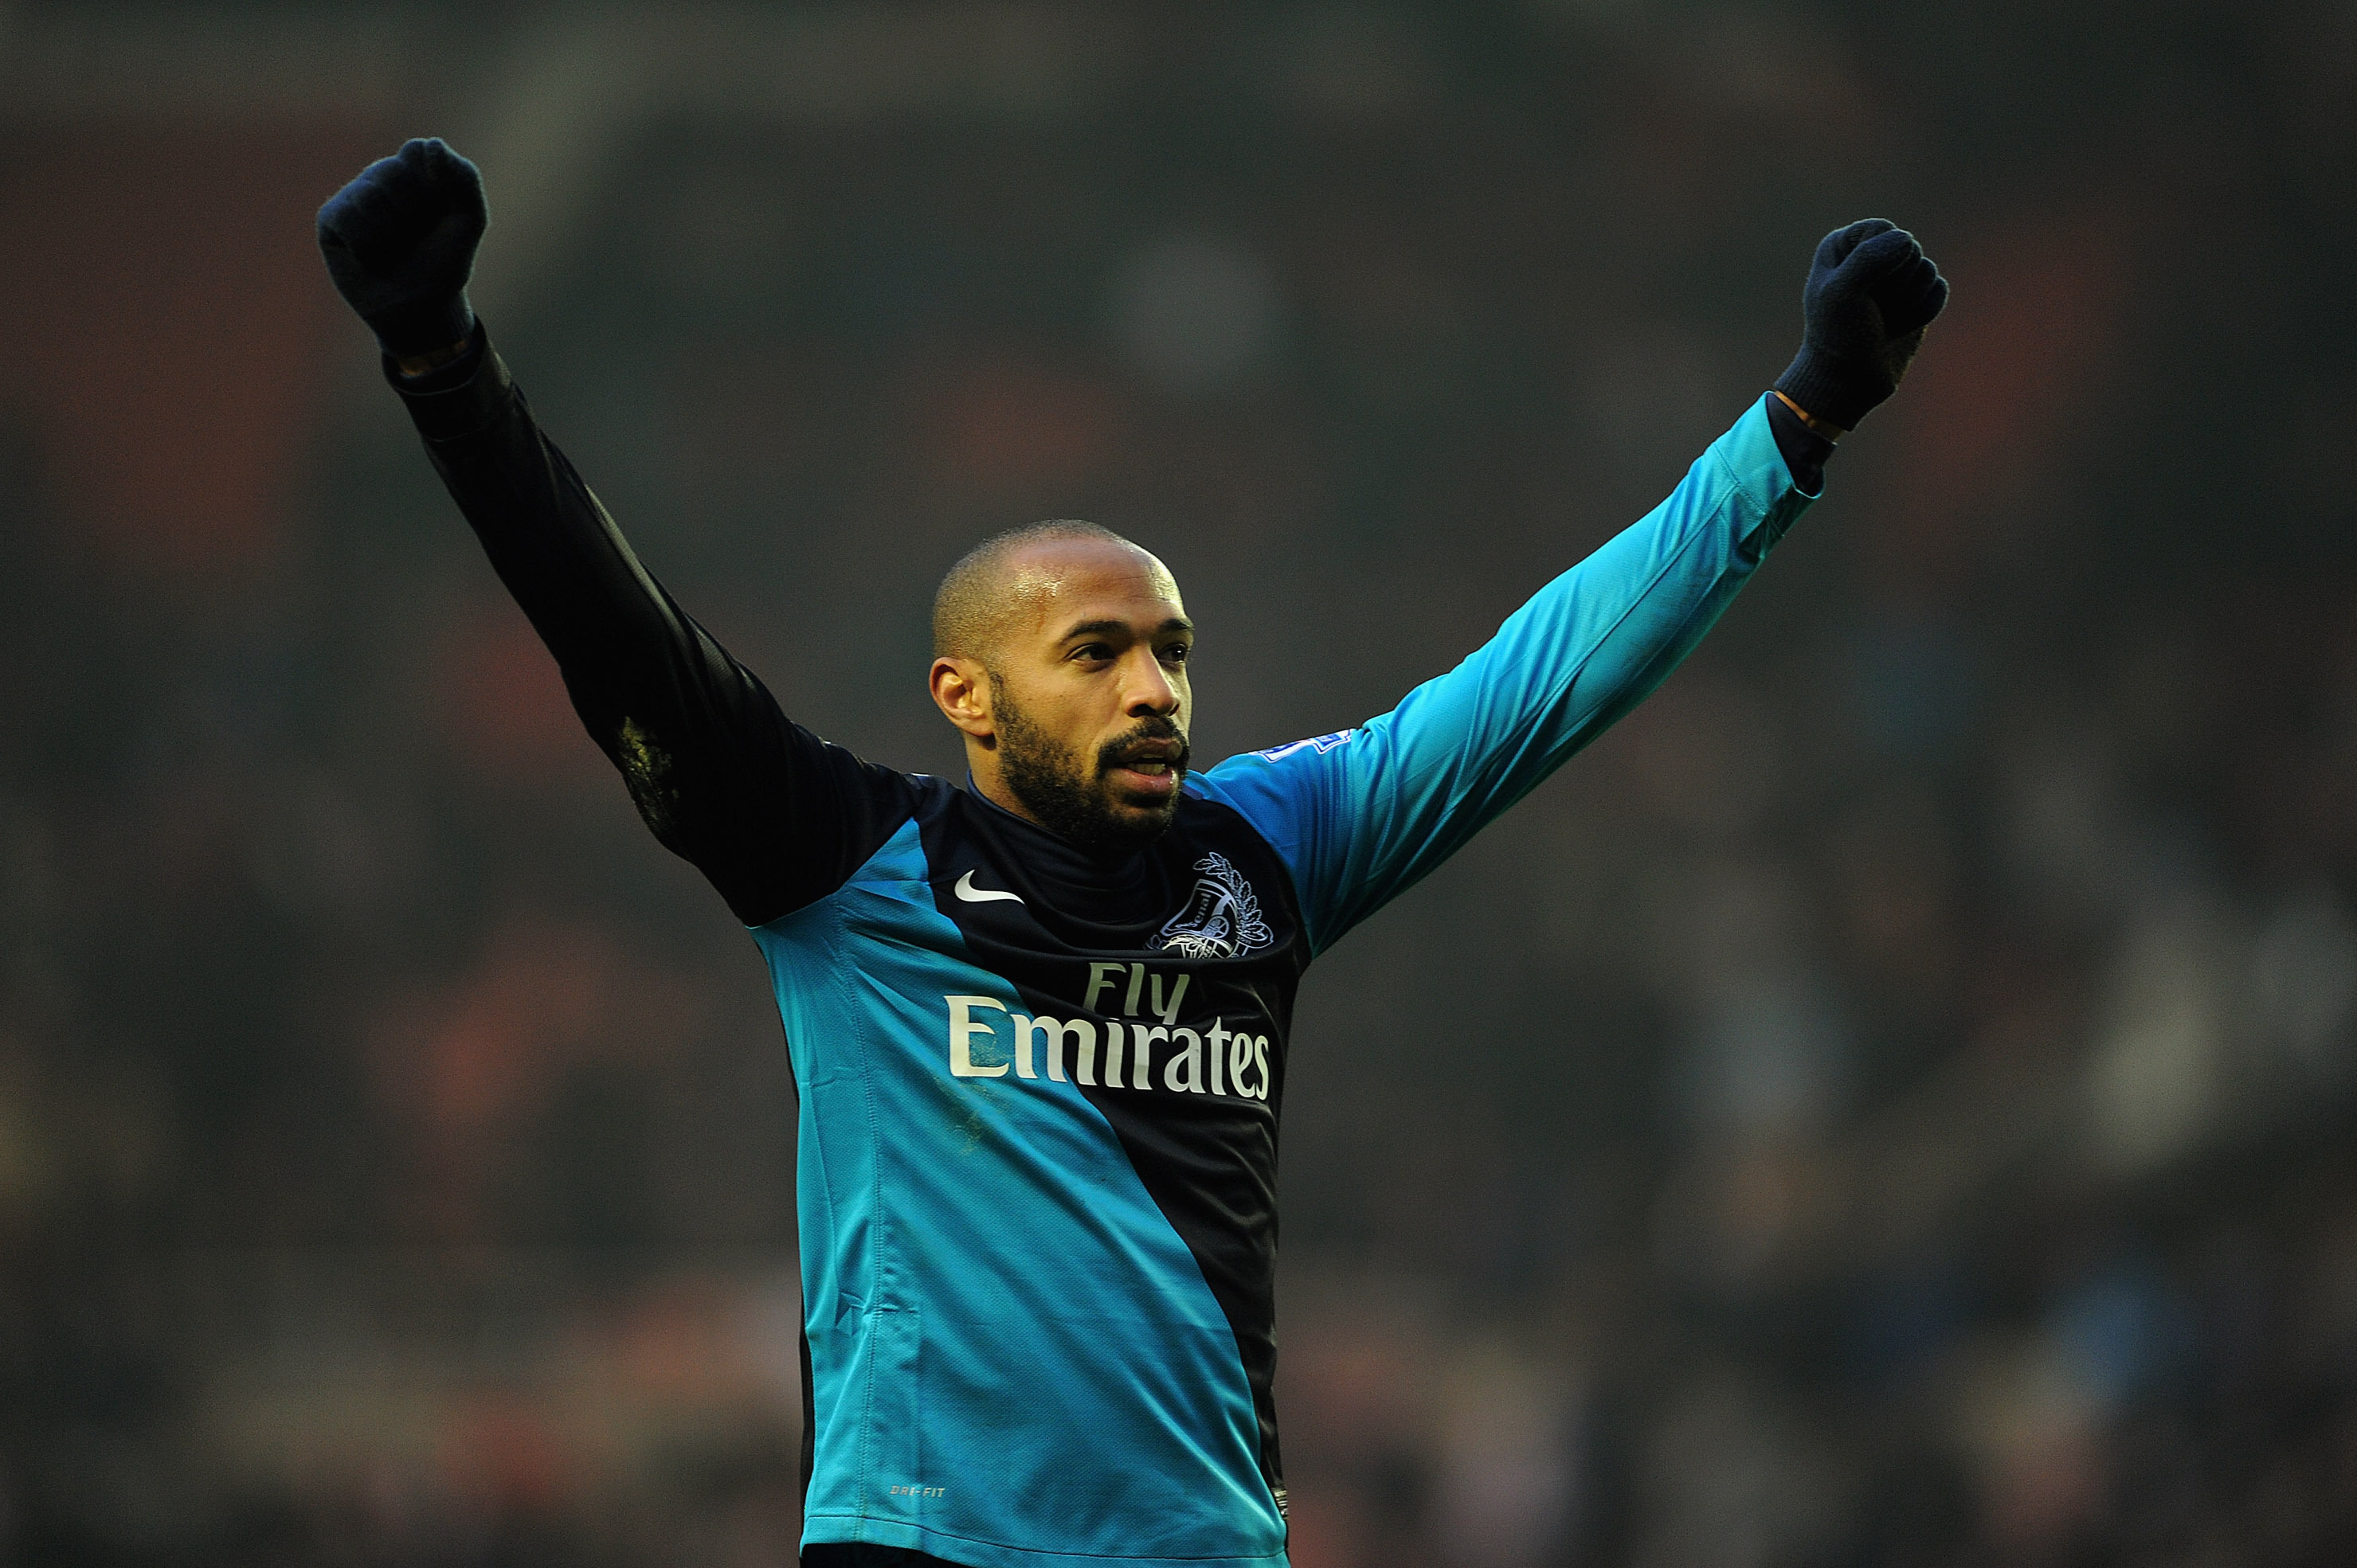 Thierry Henry will make big screen debut with cameo role in